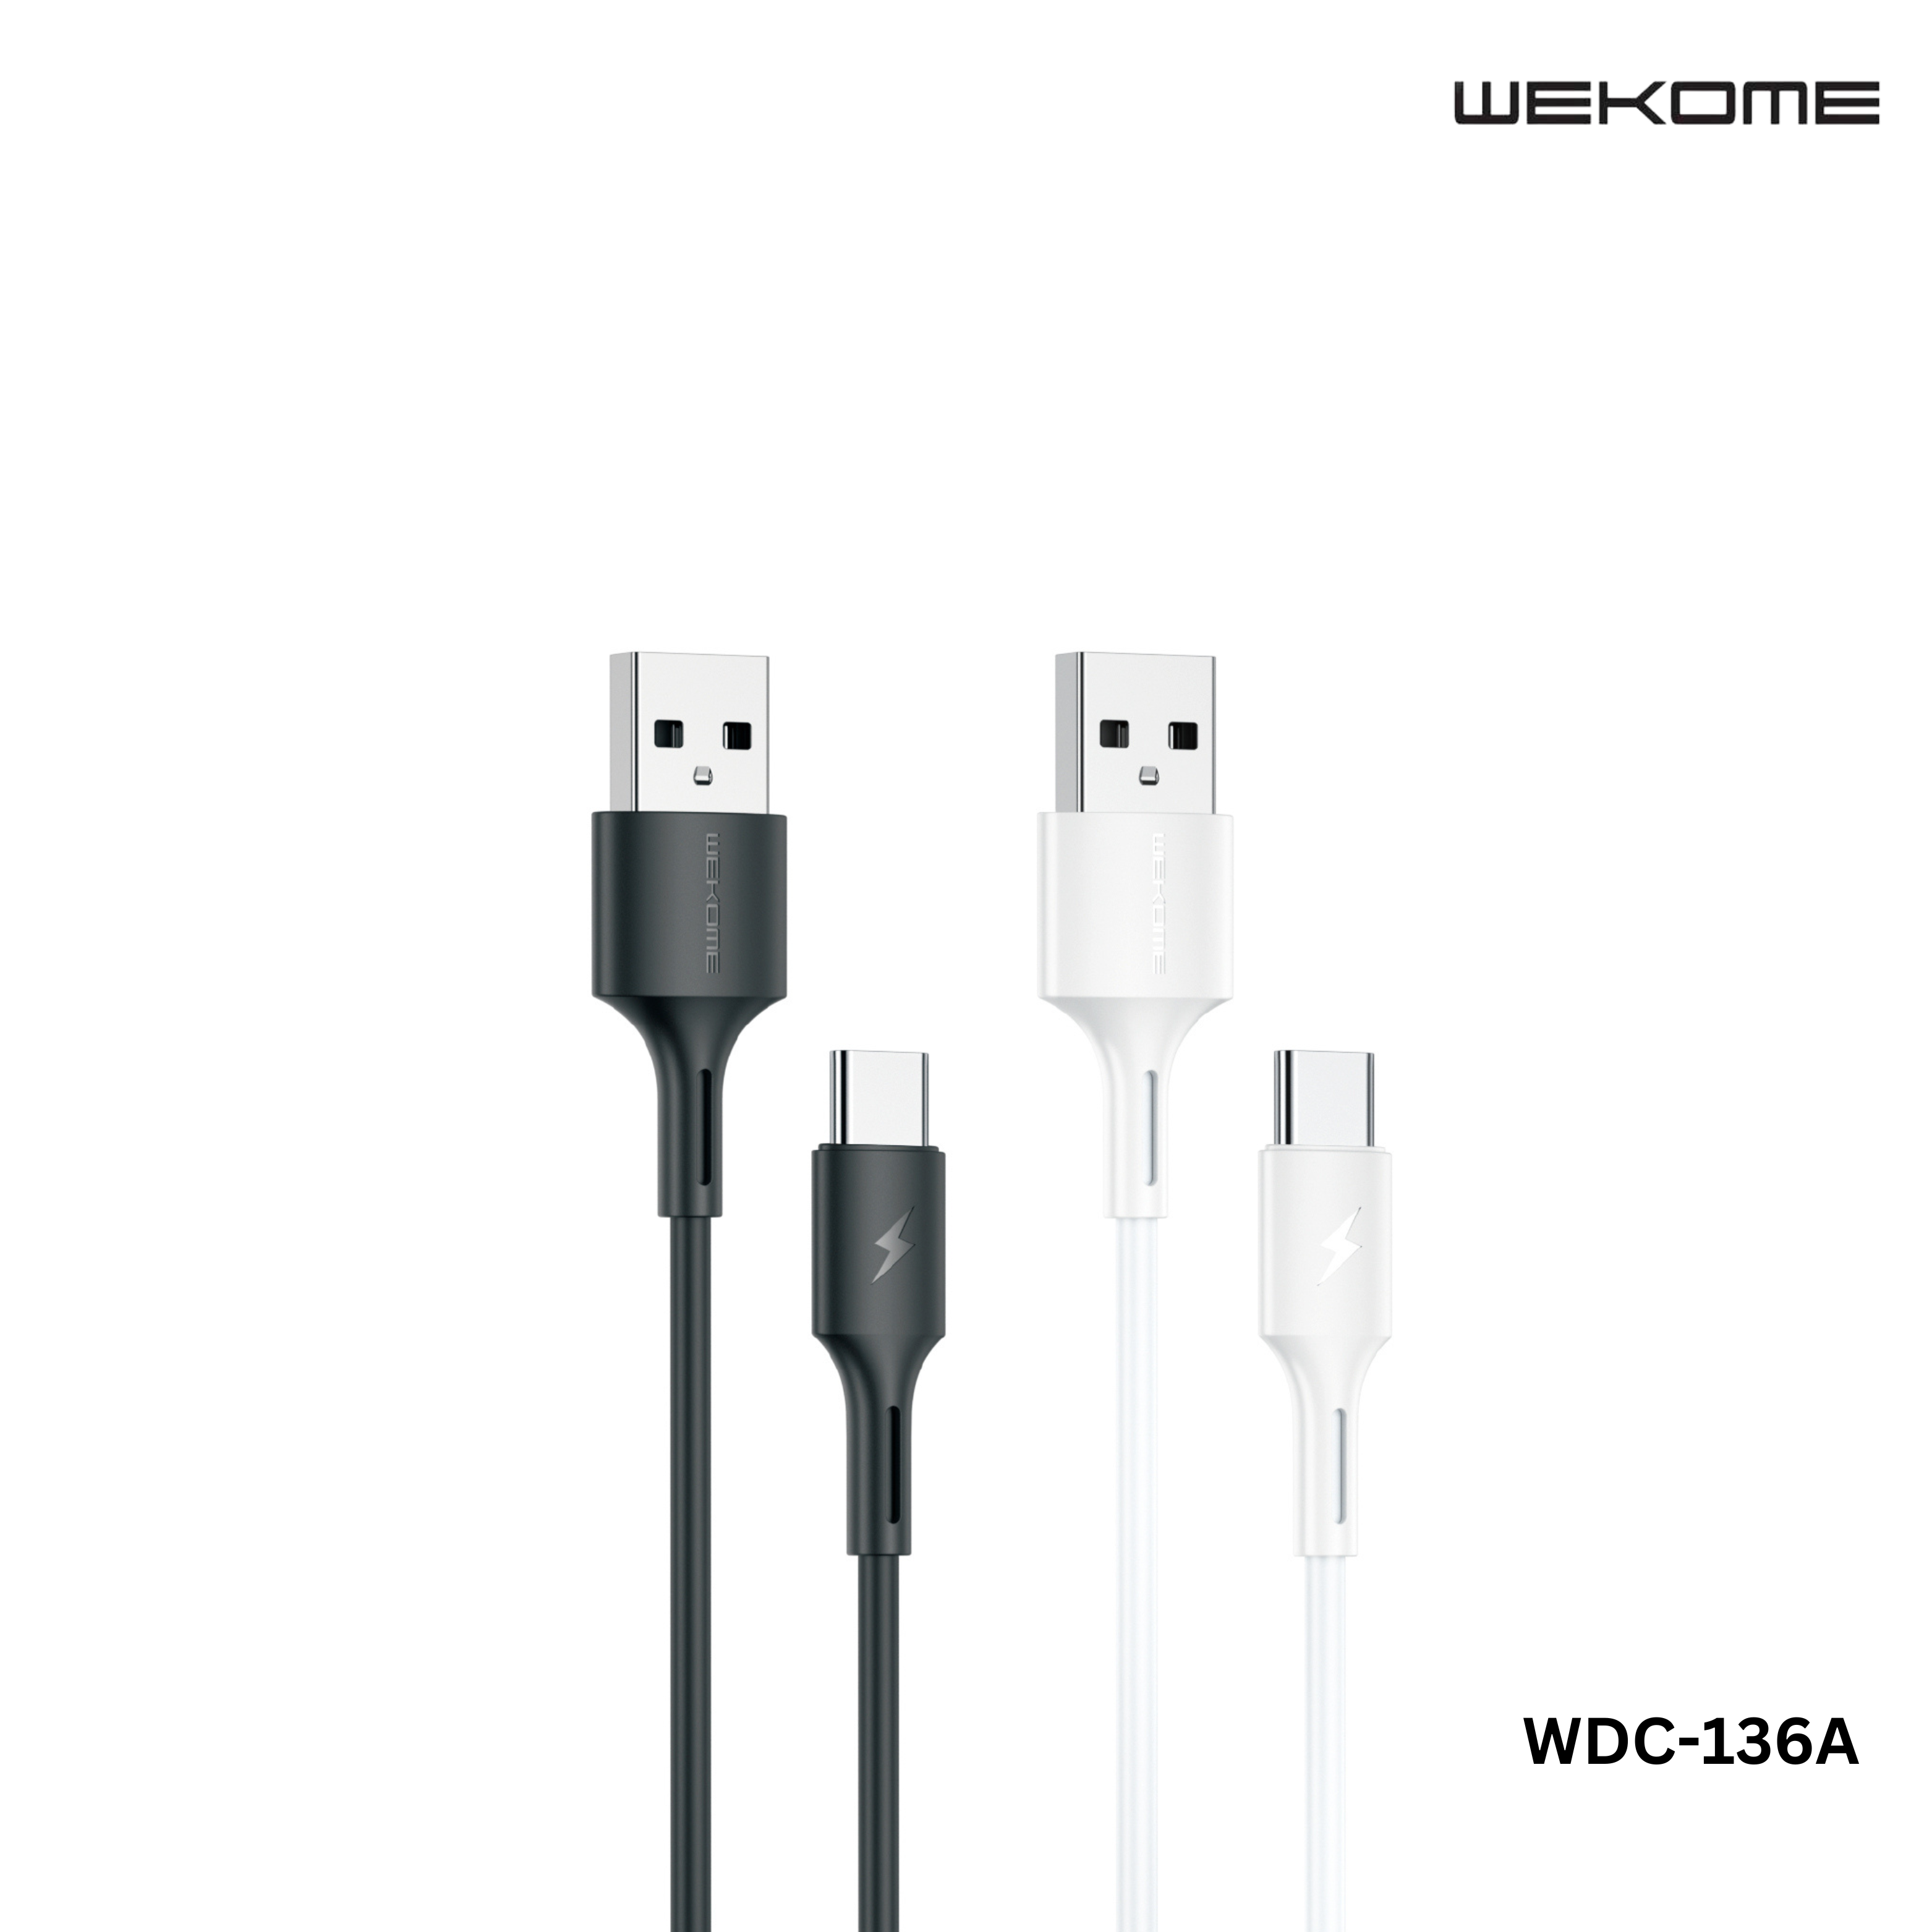 WEKOME Type C Cable (WDC-136A) YOUPIN SERIES 3A DATA CABLE FOR TYPE-C (1M) (3A) (WDC-136A), Type-C Cable, Android Cable, Charging Cable